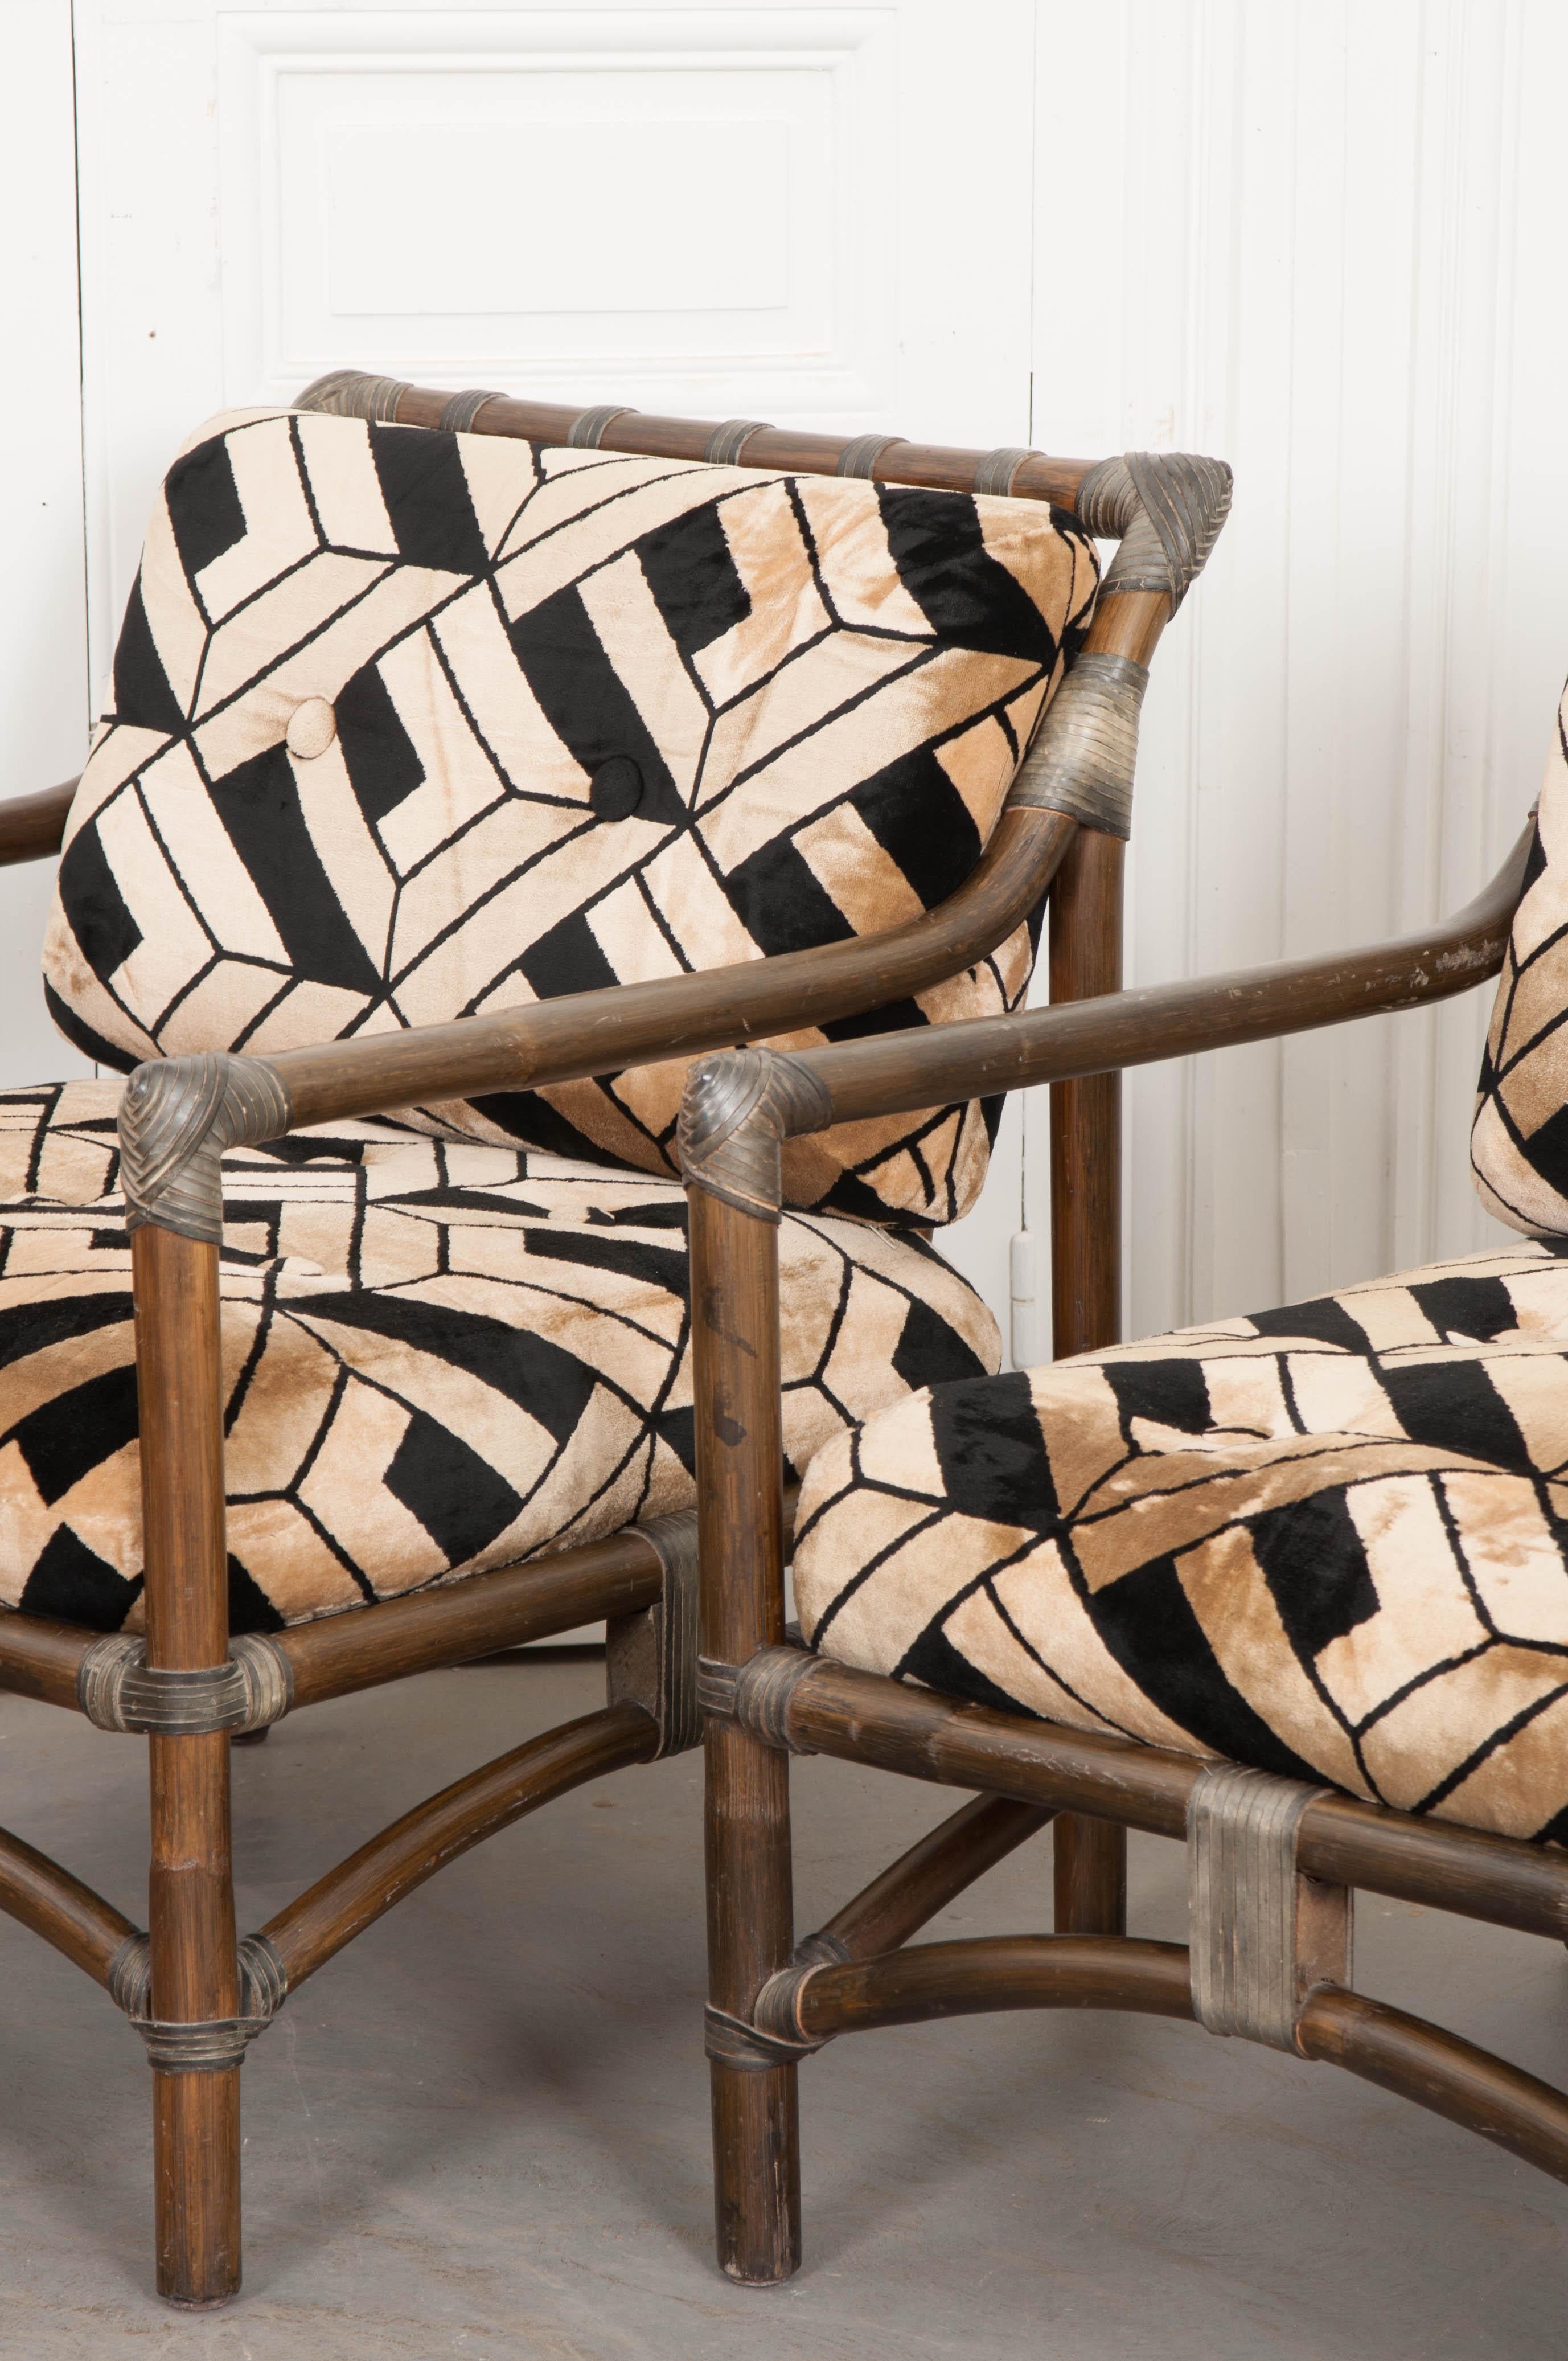 Set of Four French Mid-Century Modern Rattan Armchairs 1